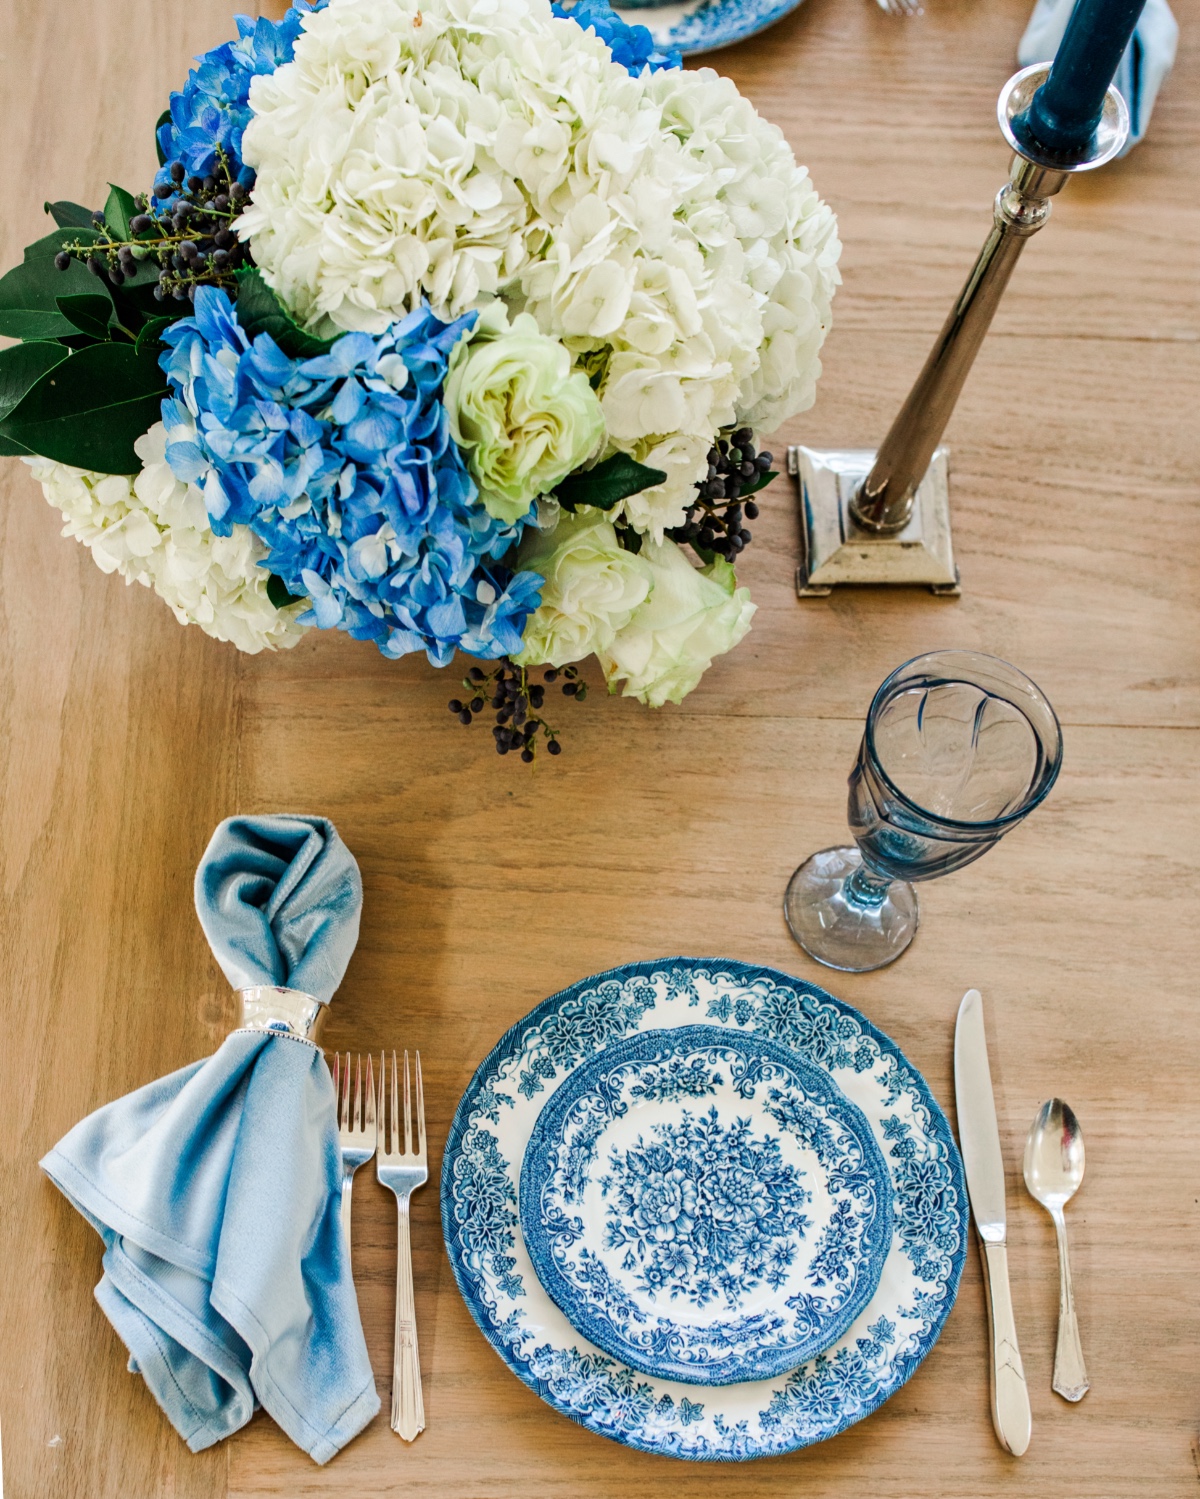 How To Incorporate Fine China Into Your Chic Microwedding